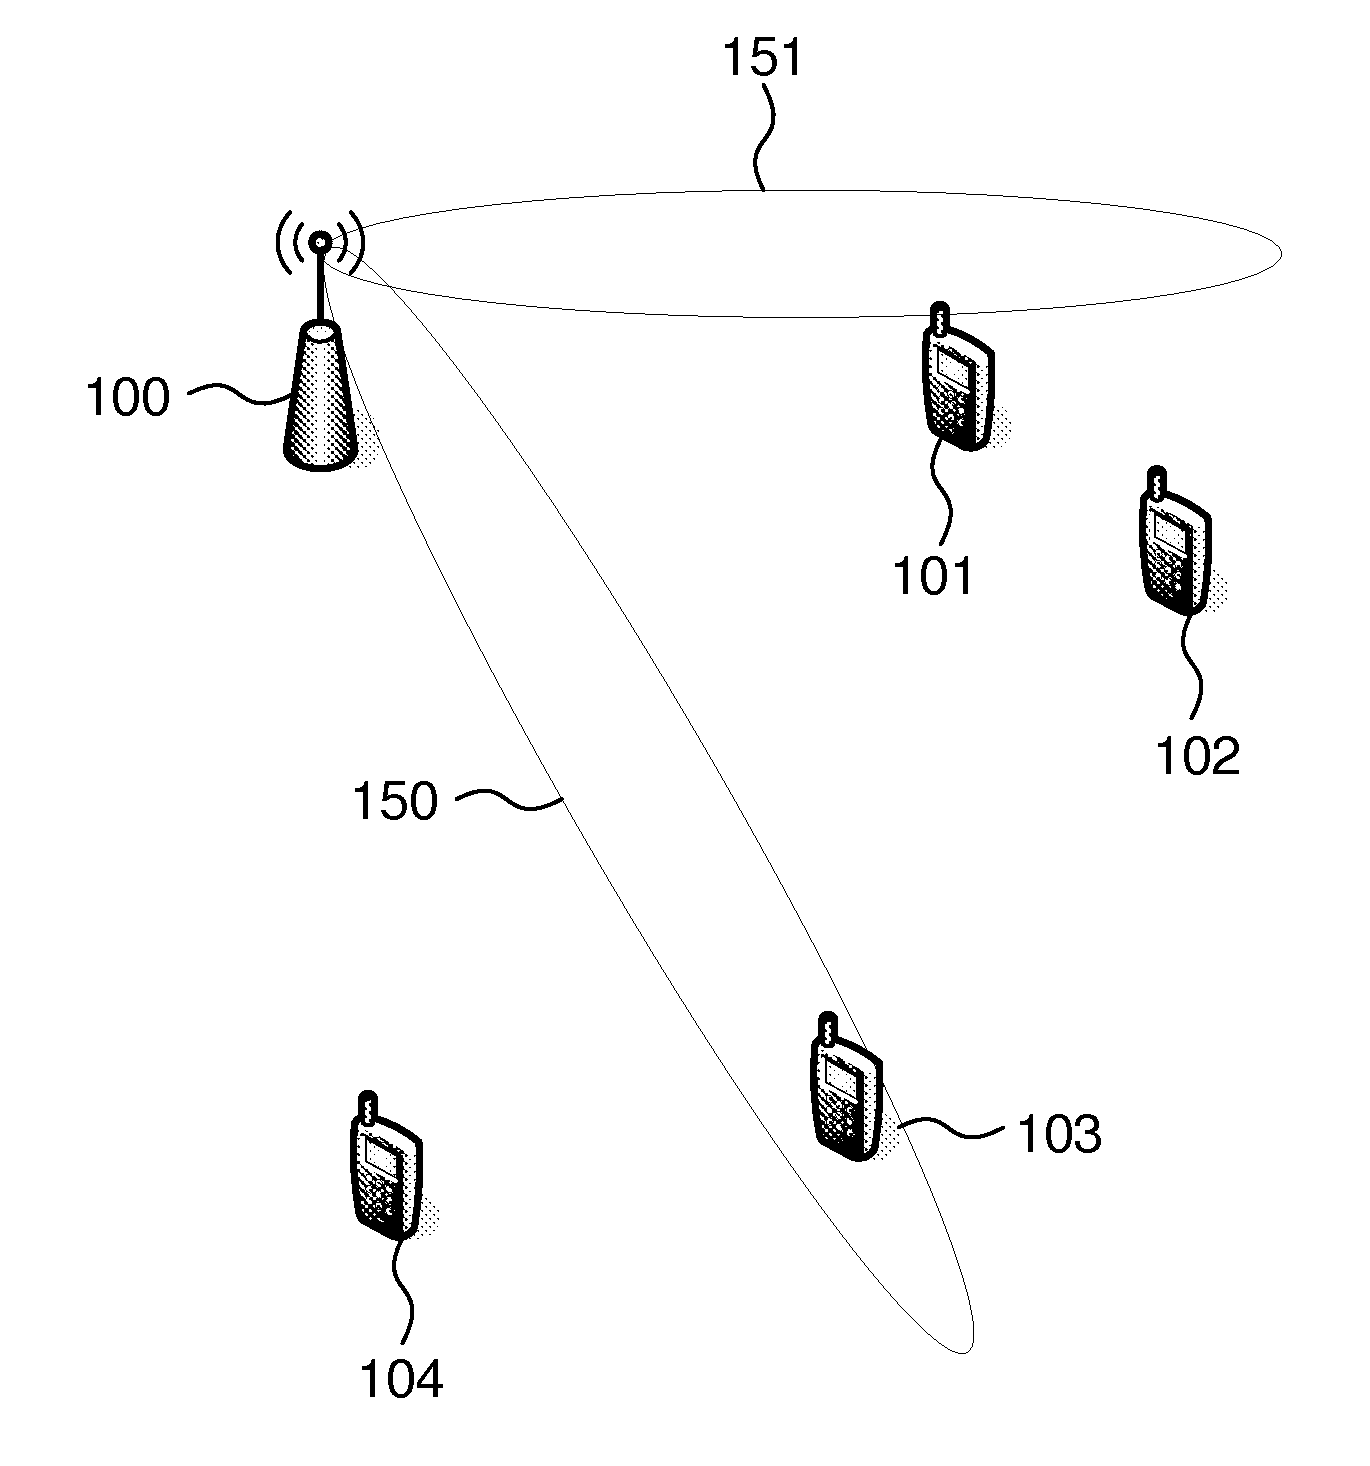 Method for communicating in a MIMO network